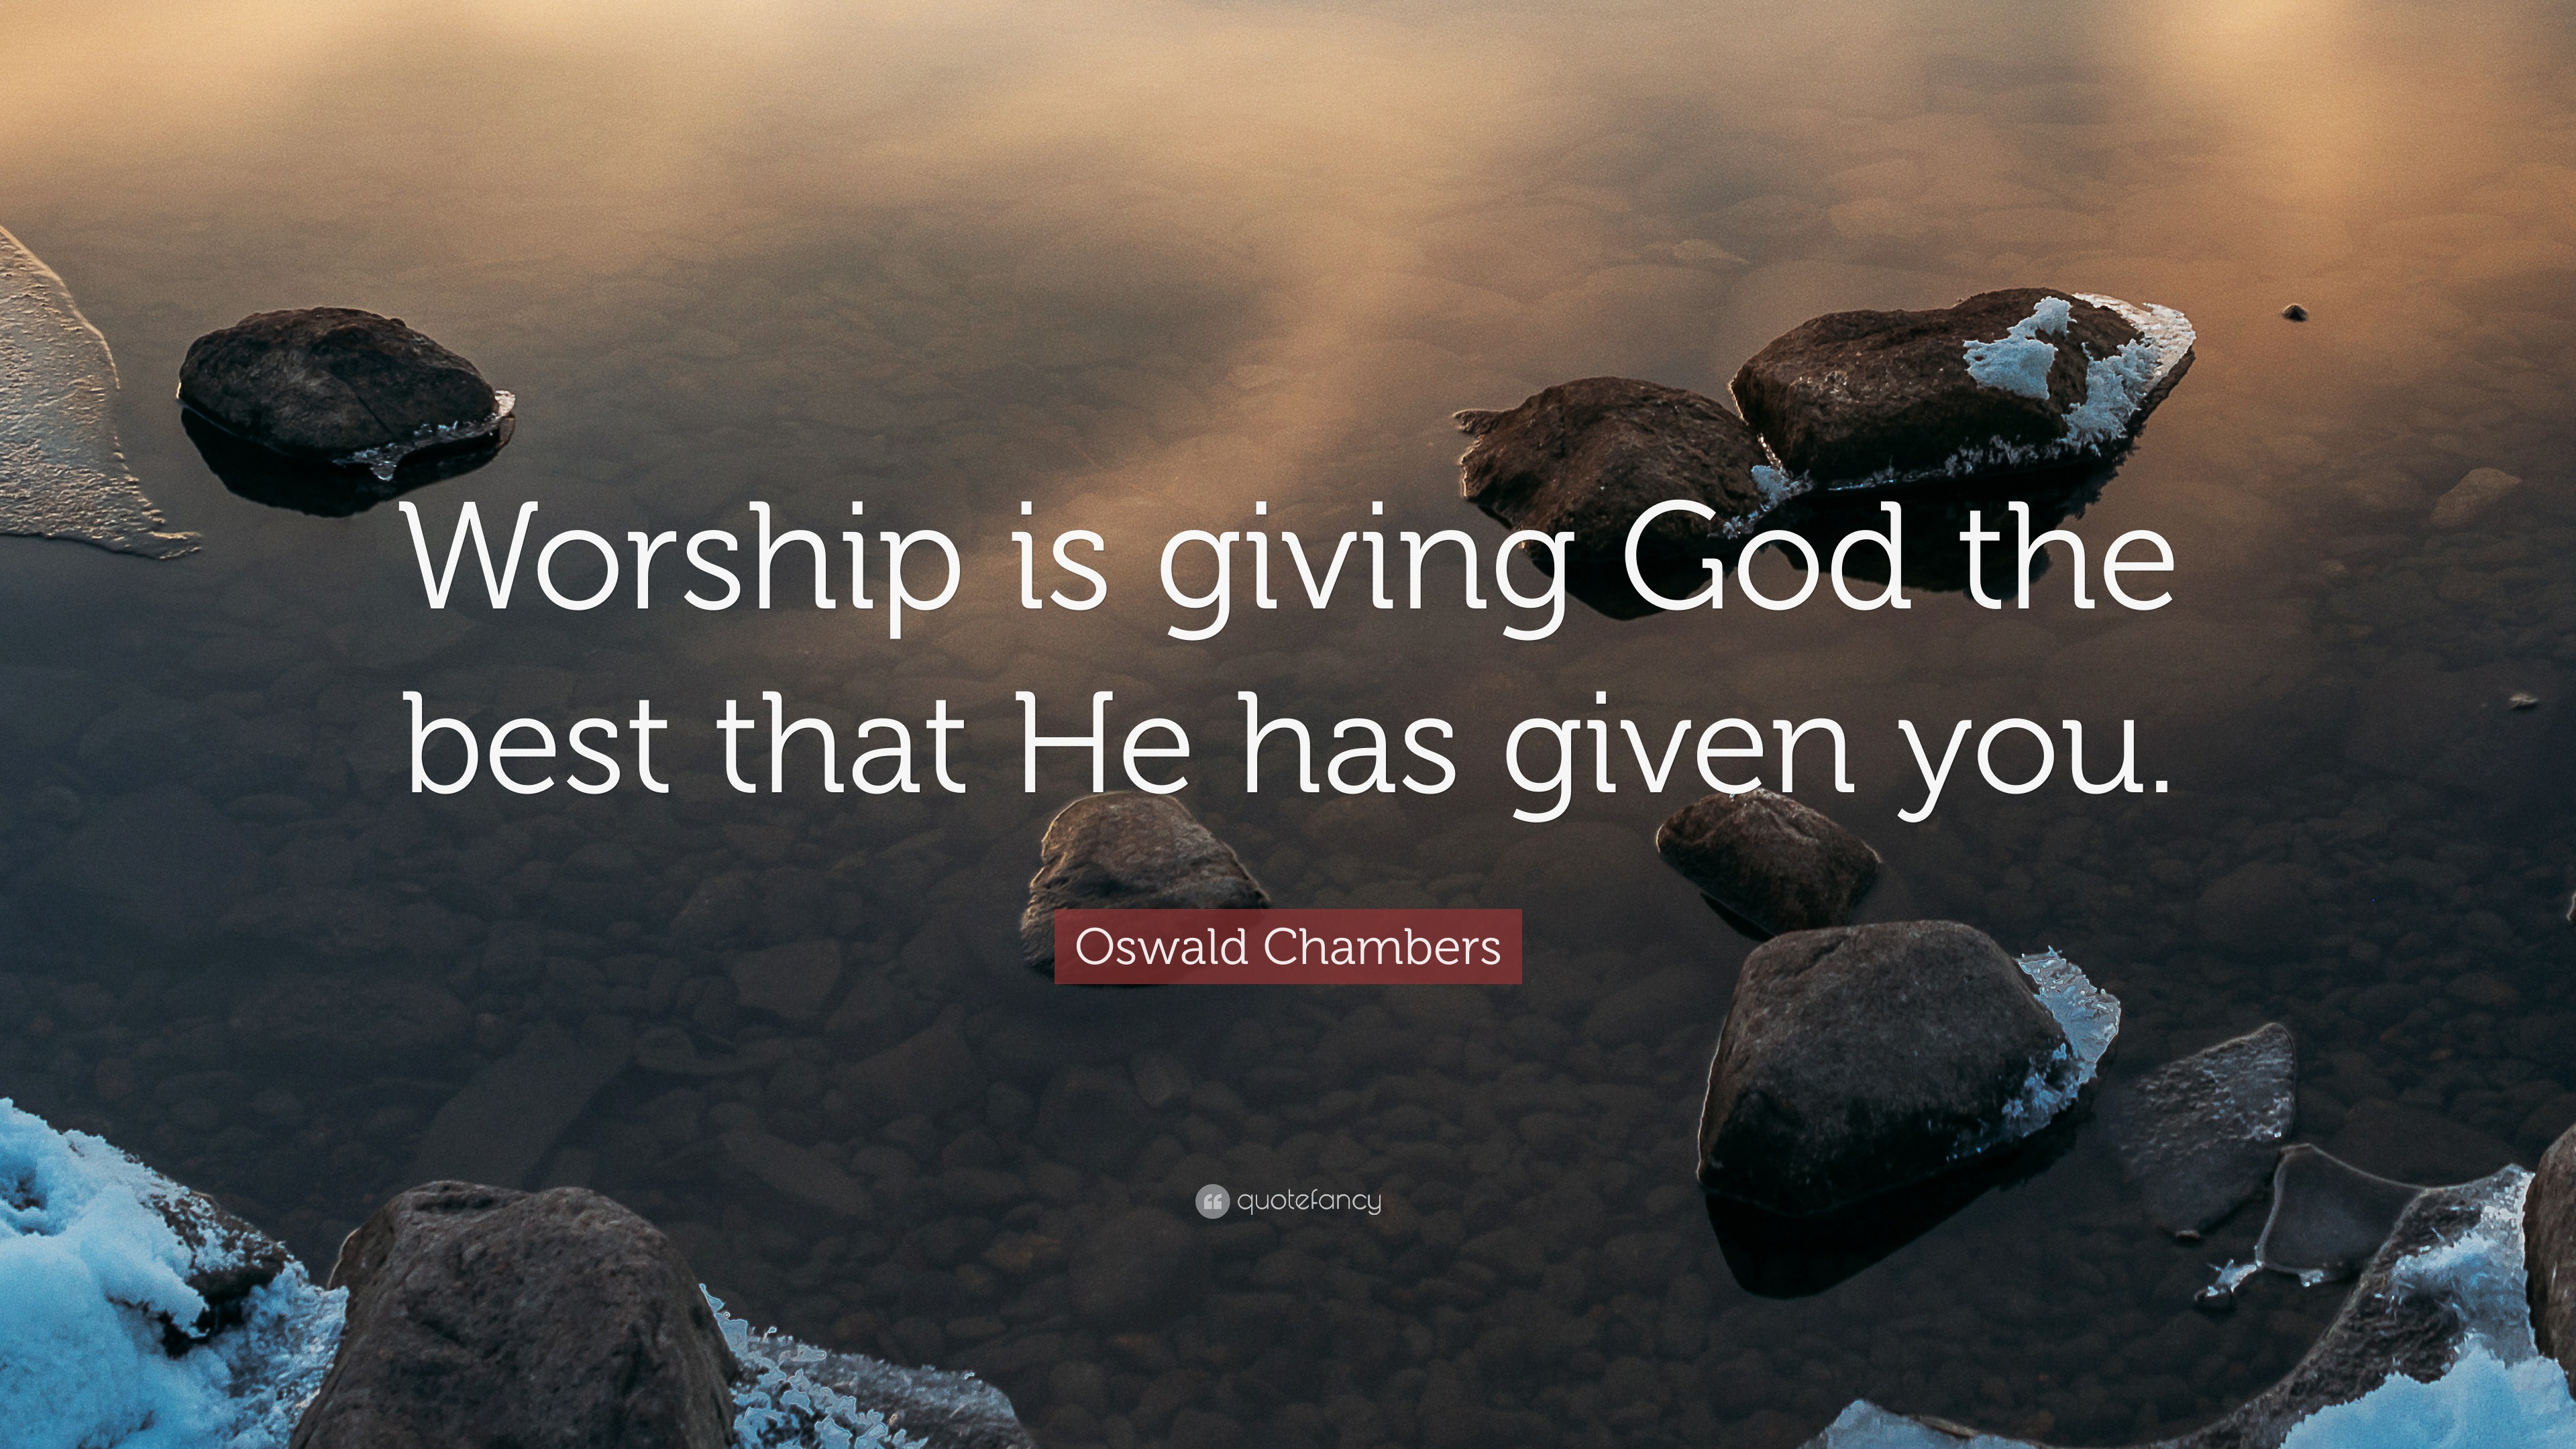 Oswald Chambers Quote: “Worship is giving God the best that He has